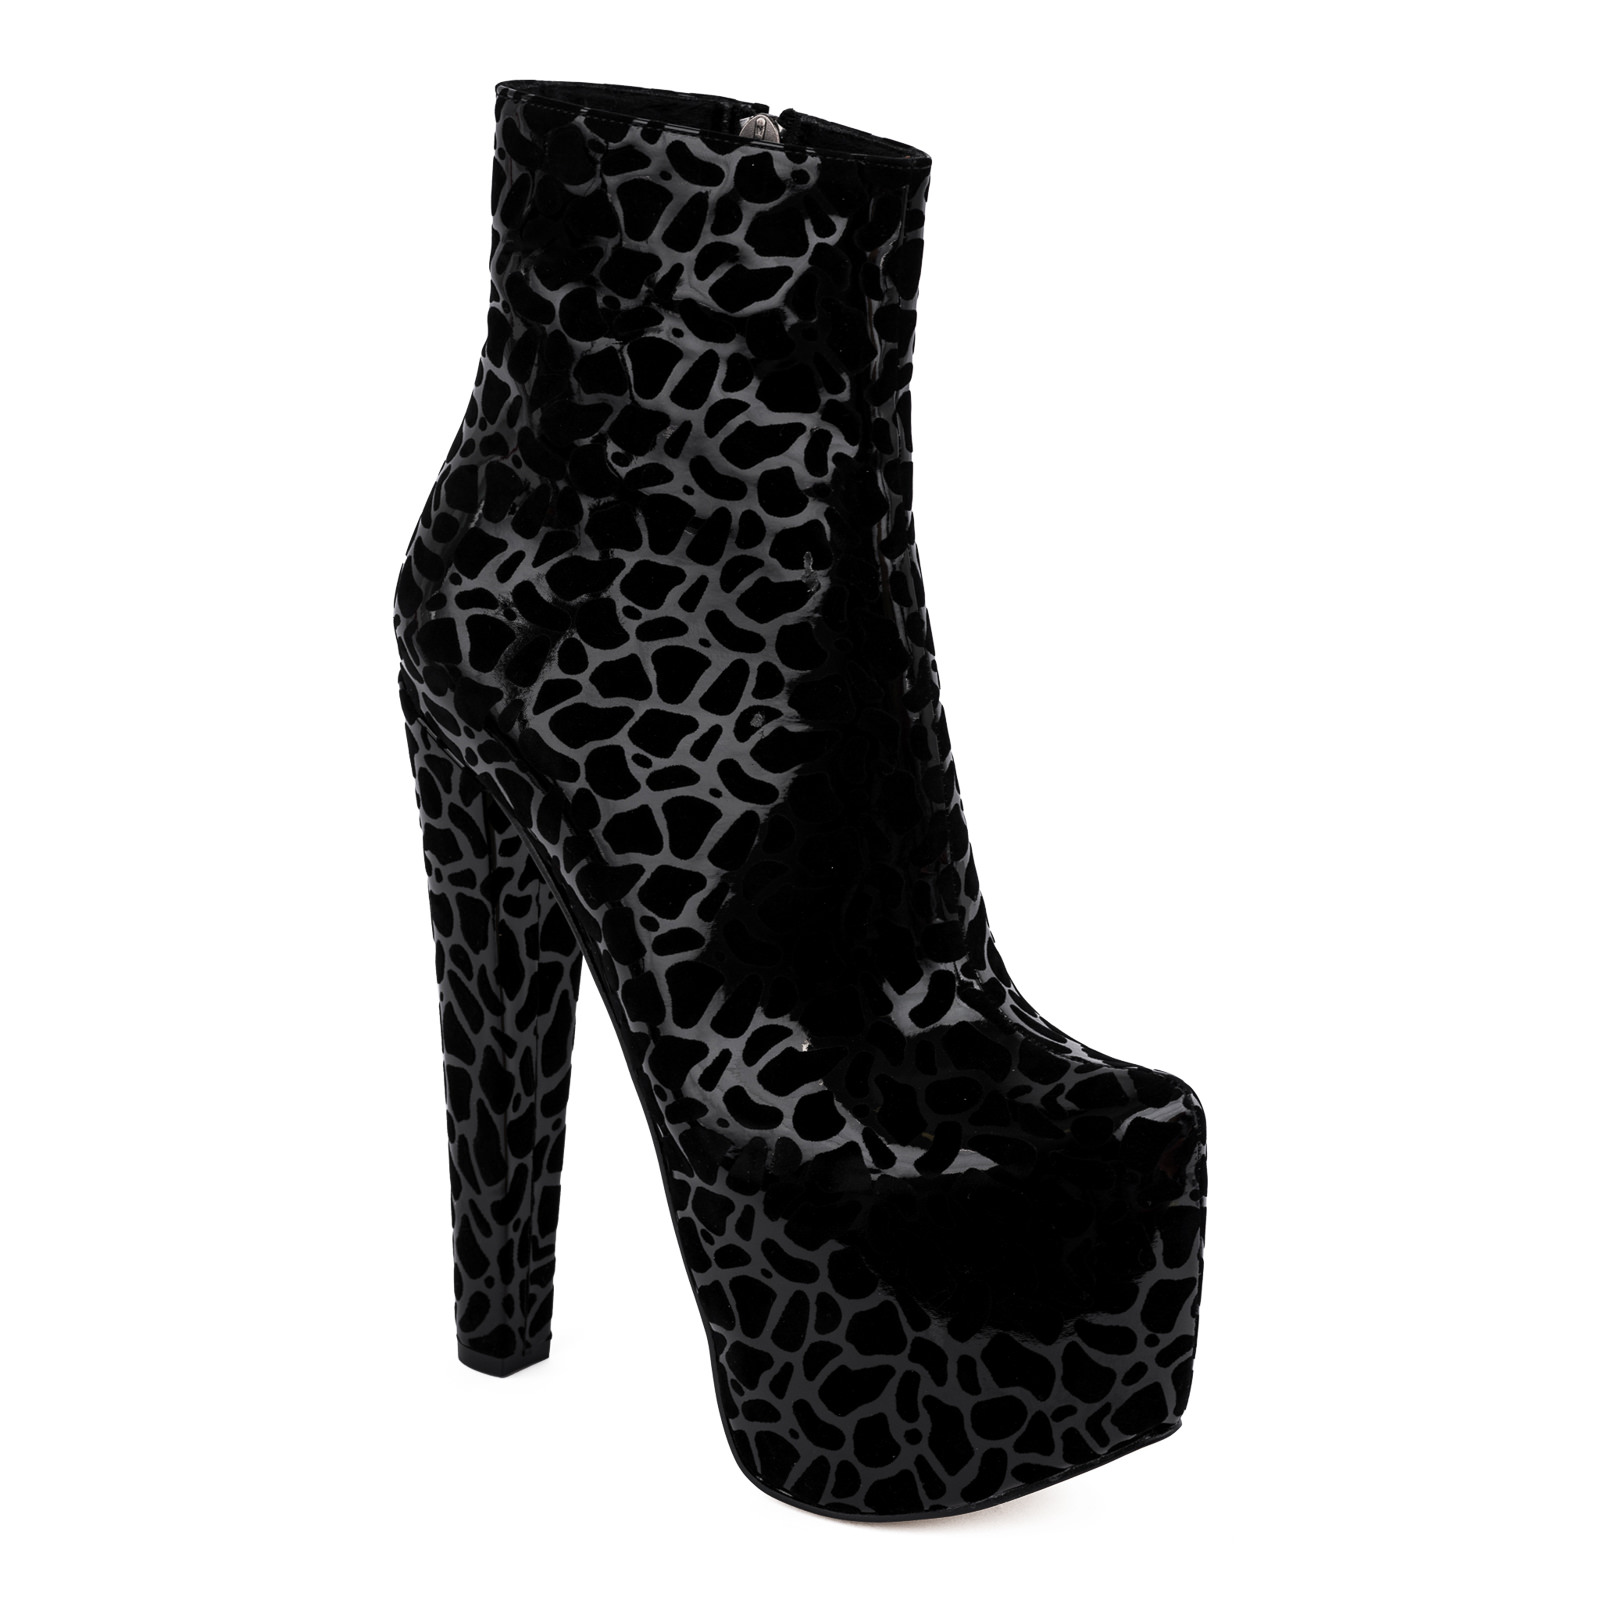 ANKLE PLATFORM BOOTS WITH THICK HEEL - BLACK